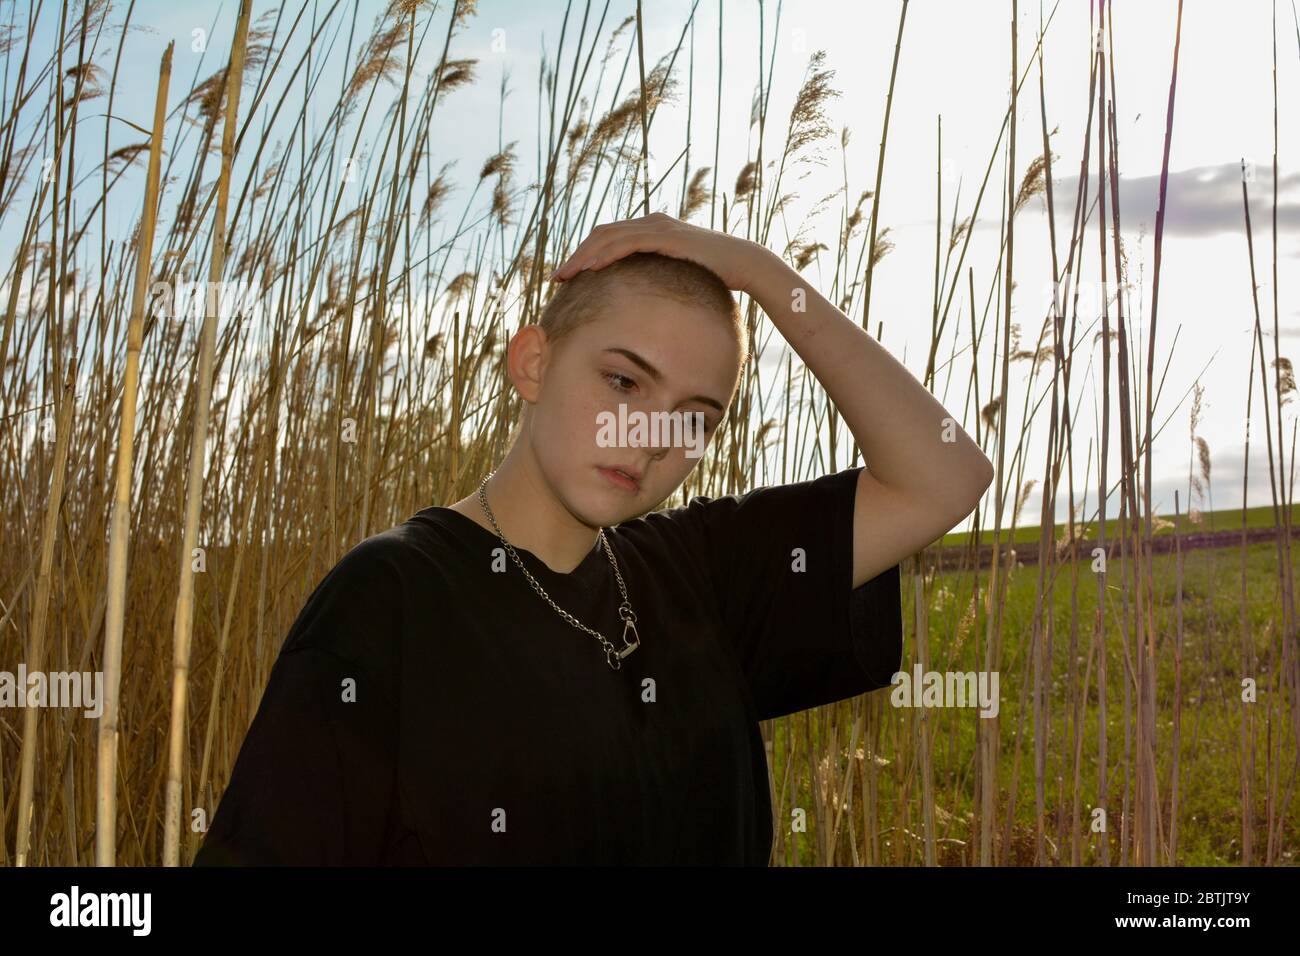 Young woman with very short hair in front of tall grass in nature, hand on the top of the head Stock Photo